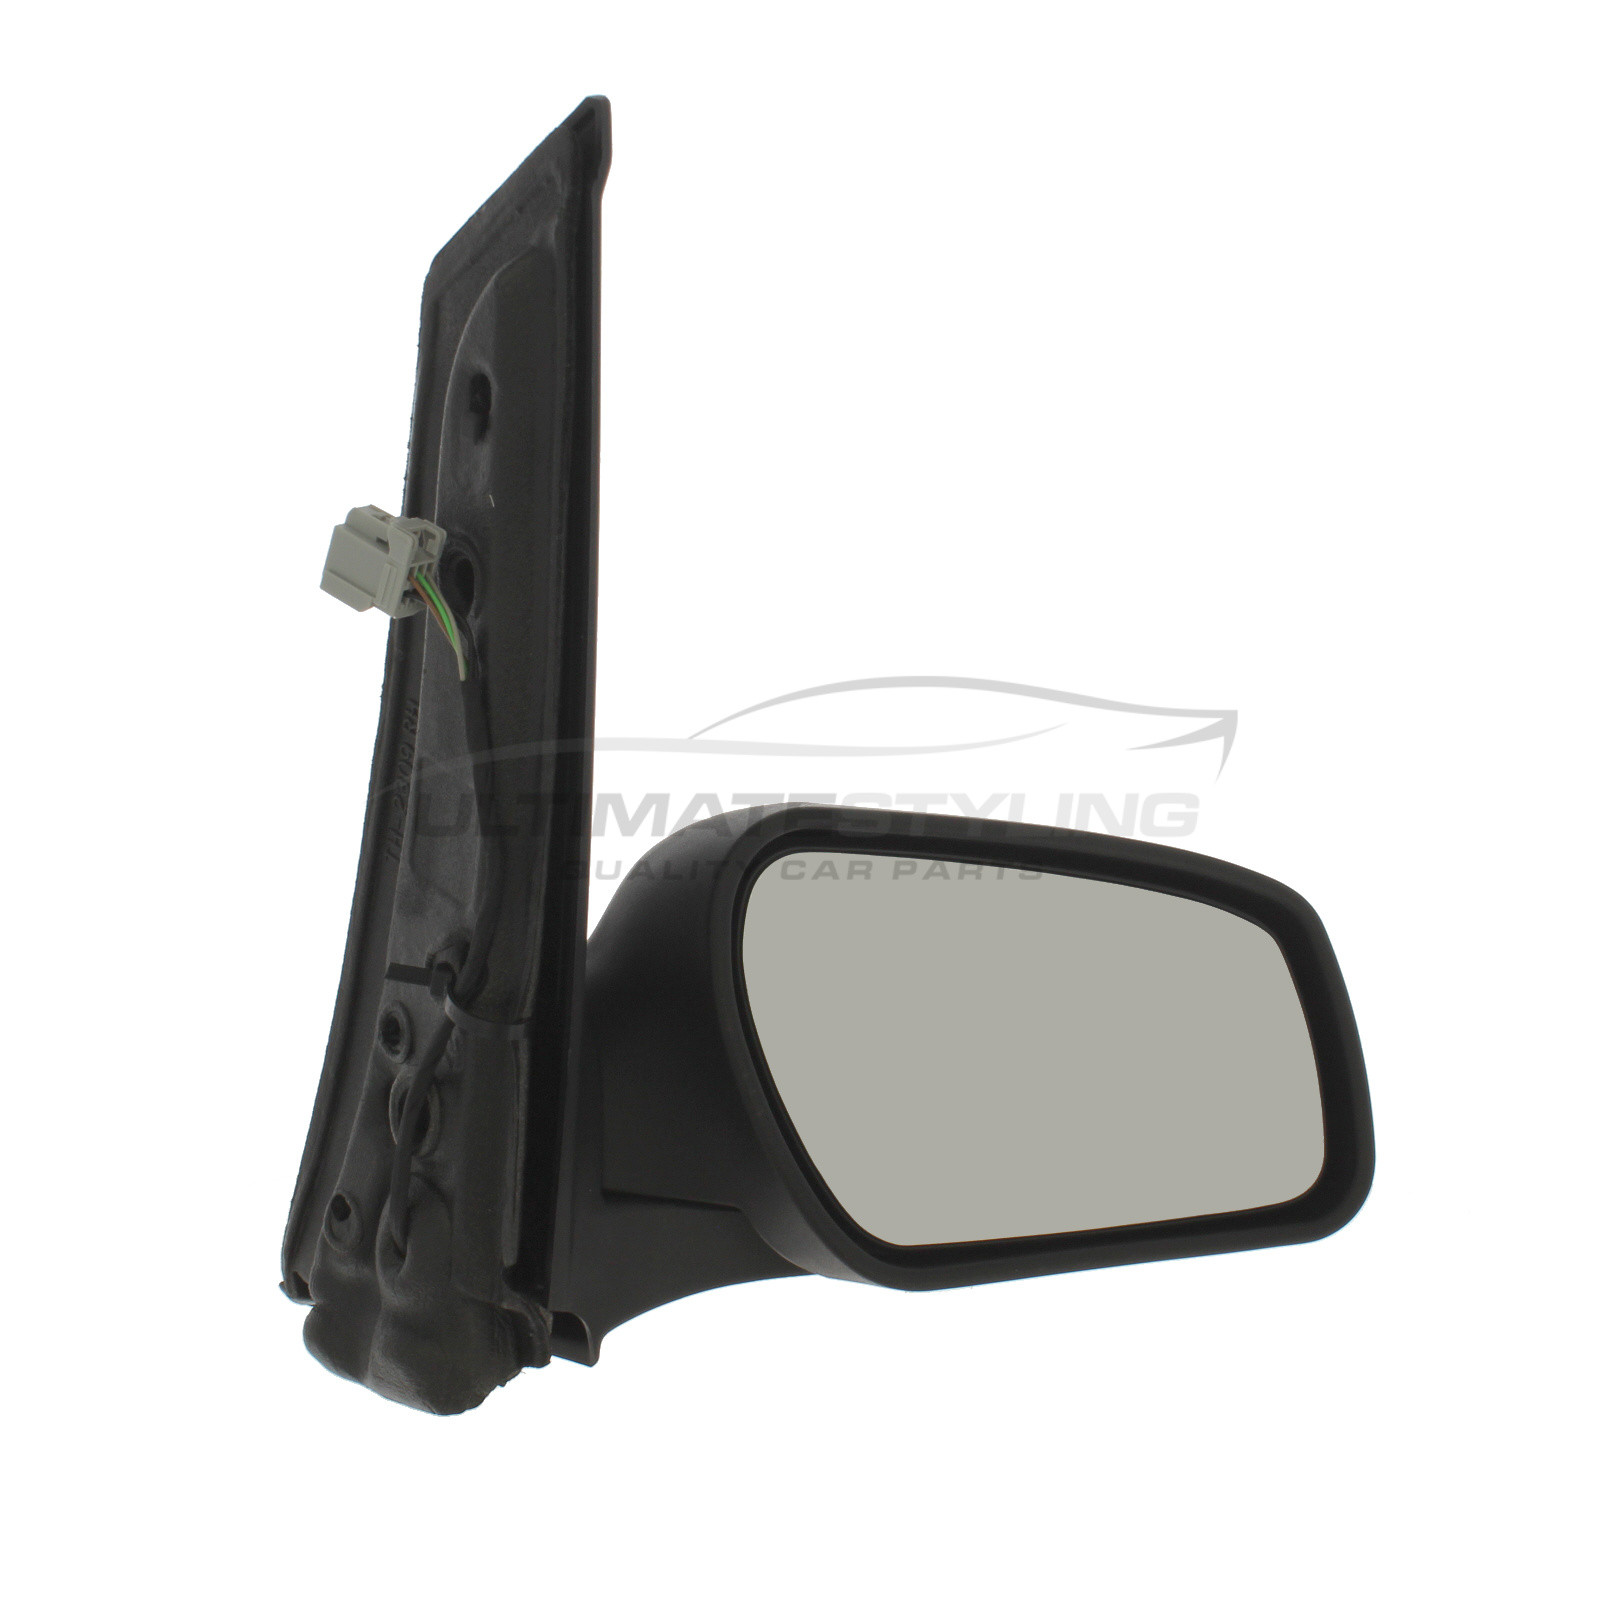 Ford Focus C Max Wing Mirror Door Mirror Drivers Side Rh Electric Adjustment Heated Glass Paintable Black